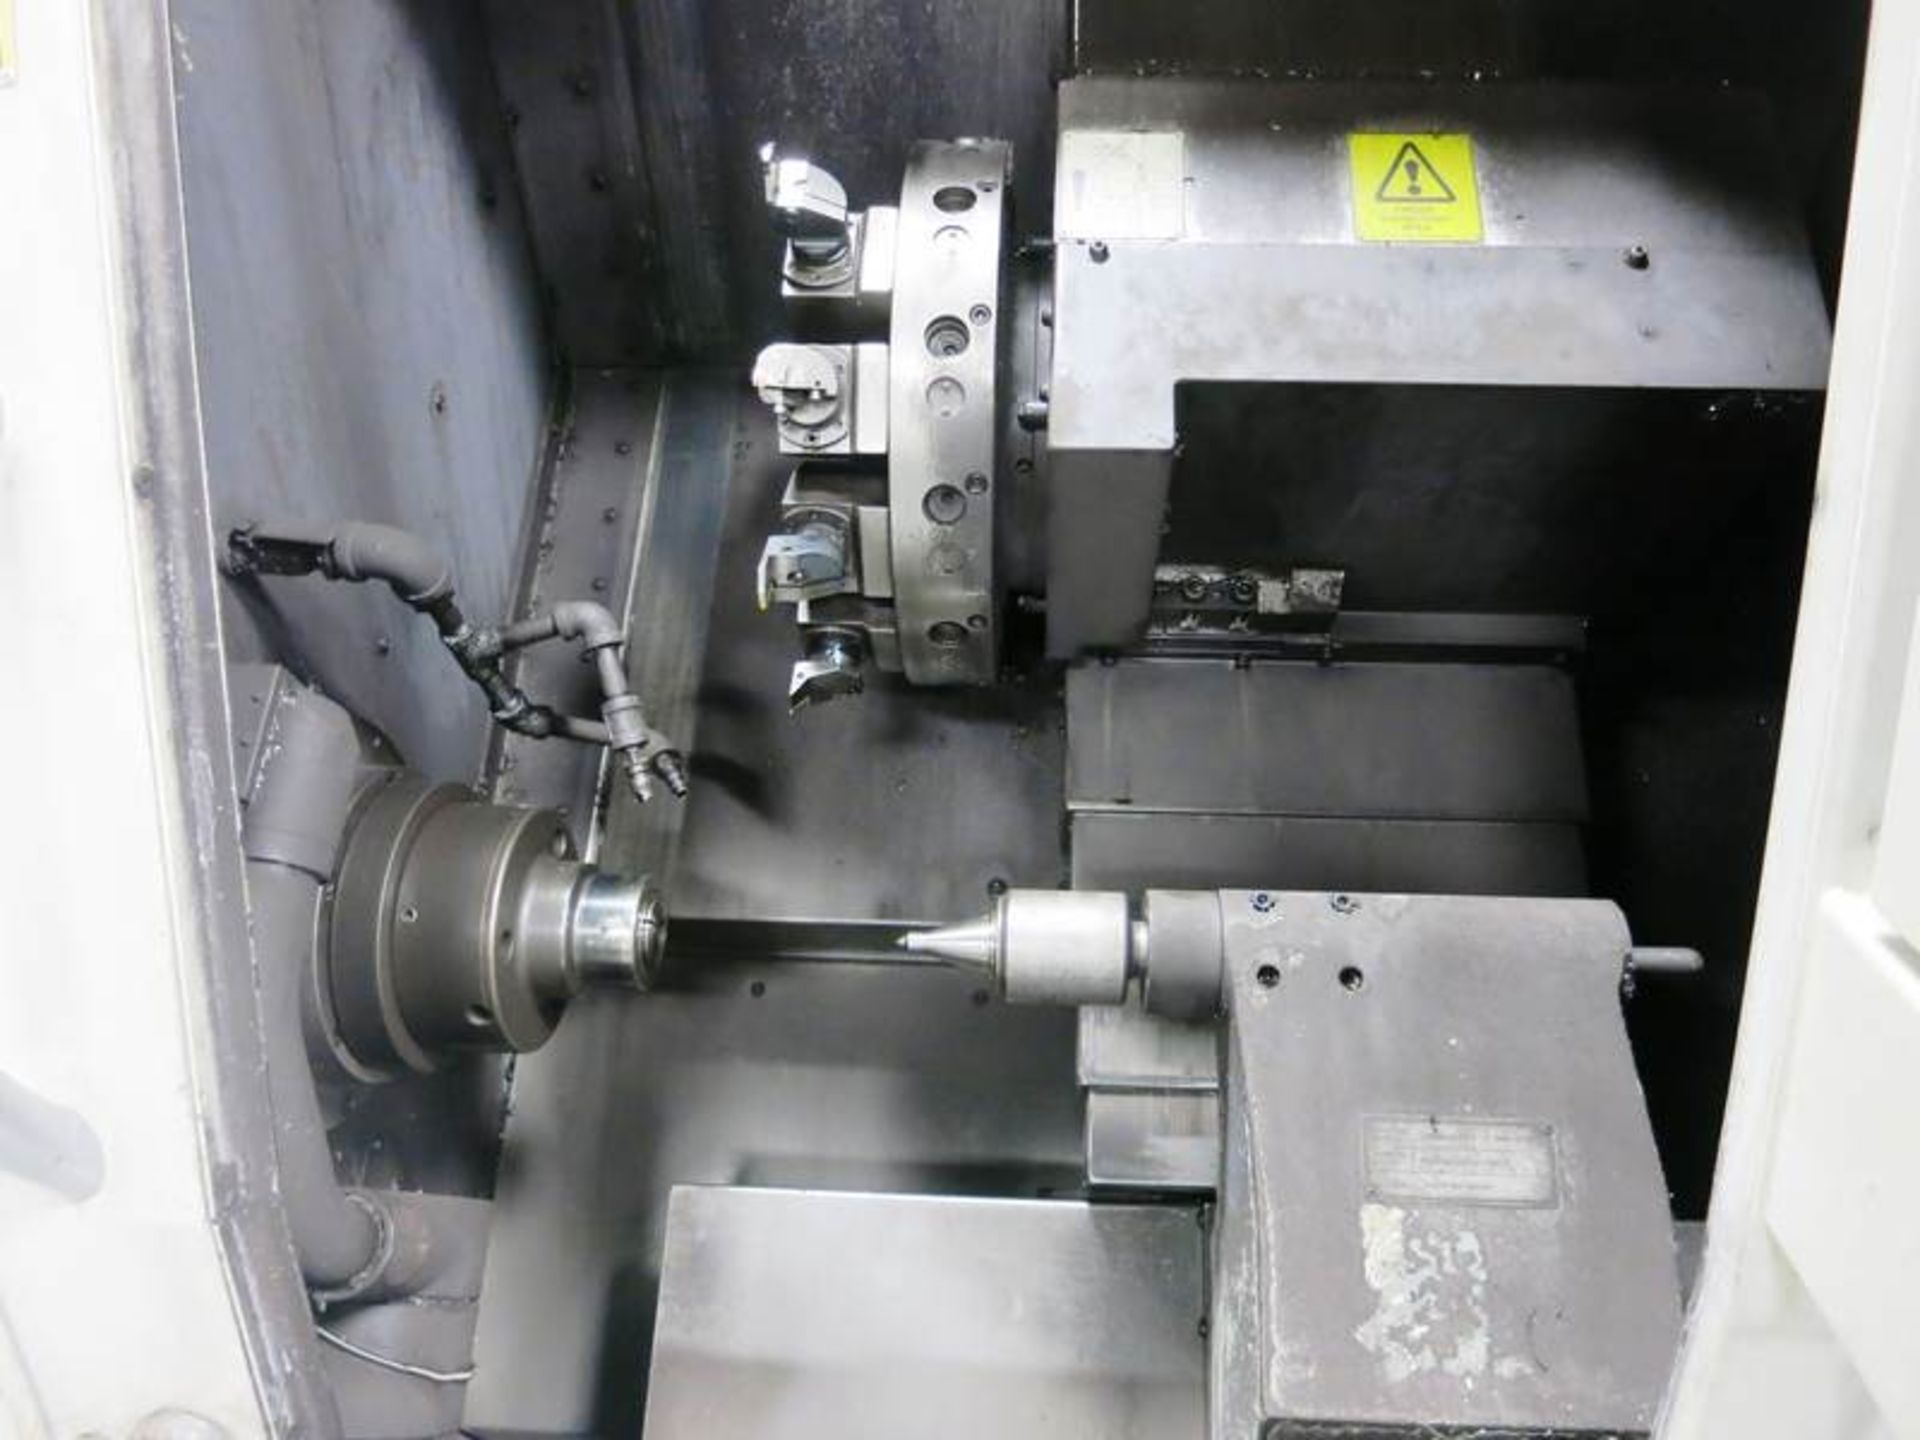 Hardinge Talent 6/45 2-Axis CNC Turning Center Lathe, S/N BLAAGE0076, New 2006 General - Image 3 of 8